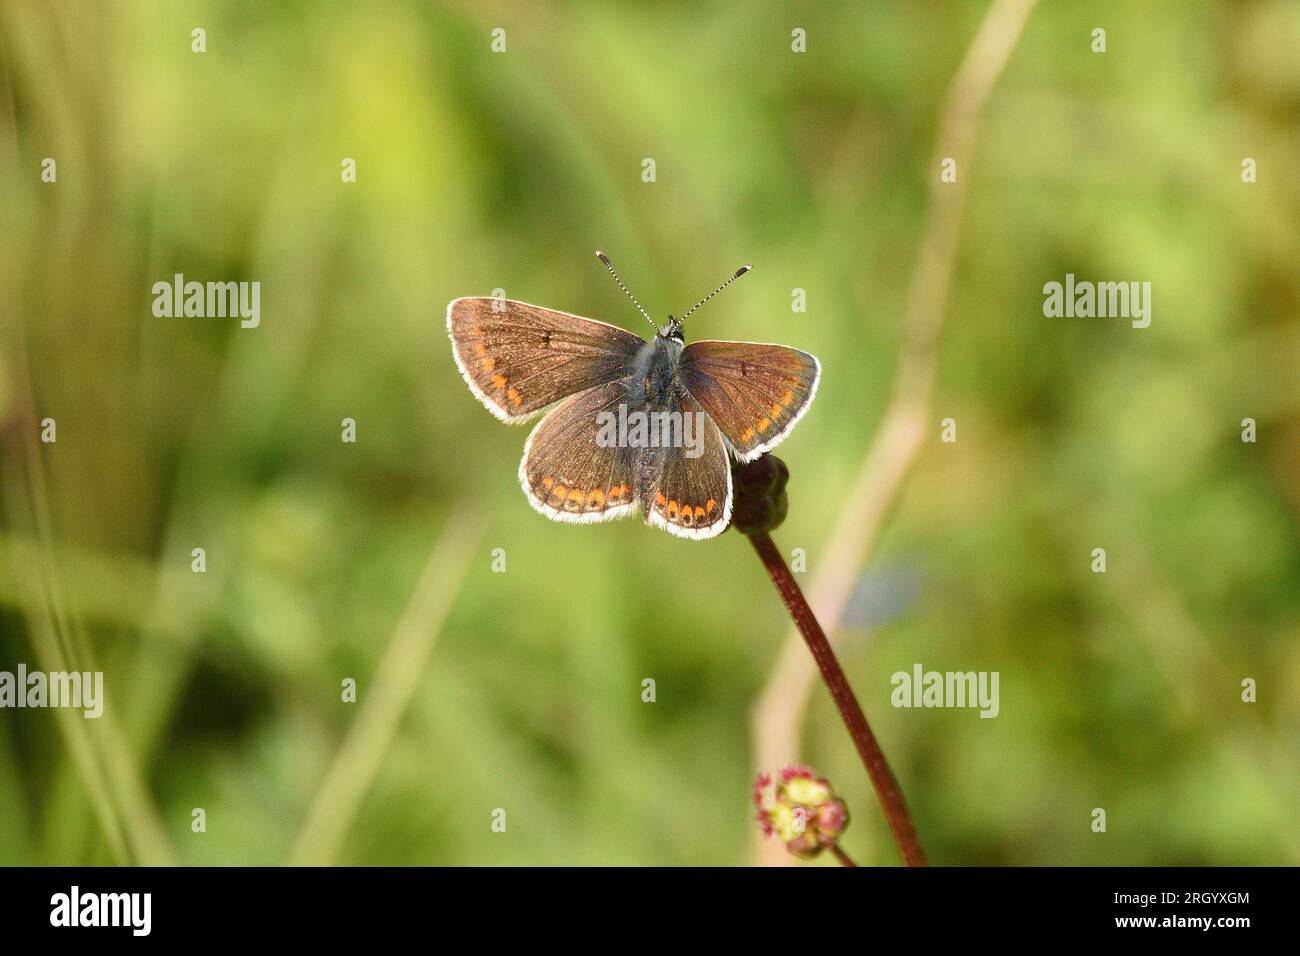 Brown Argus butterfly resting on a wildflower stem. Chiltern Hills, Hertfordshire, England, UK. Stock Photo